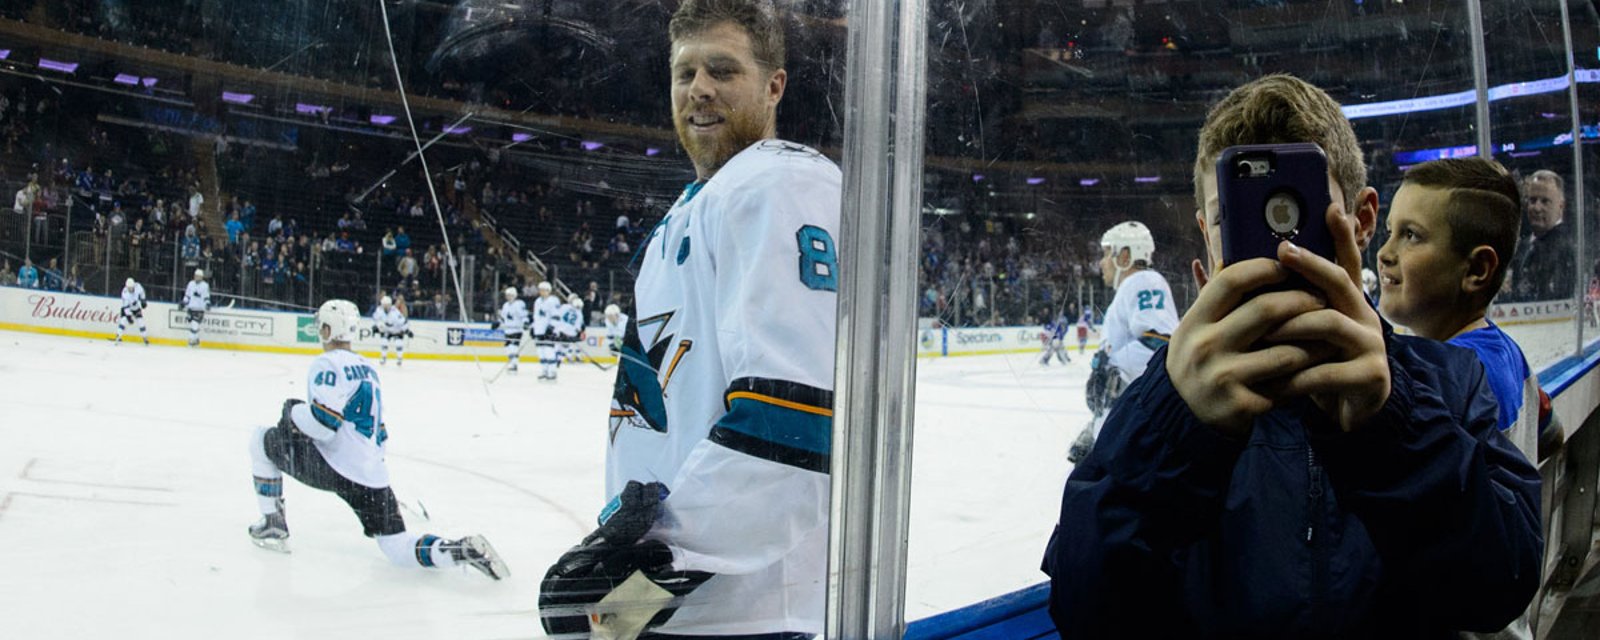 NHL fan listens in on Pavelski’s meeting with contender!